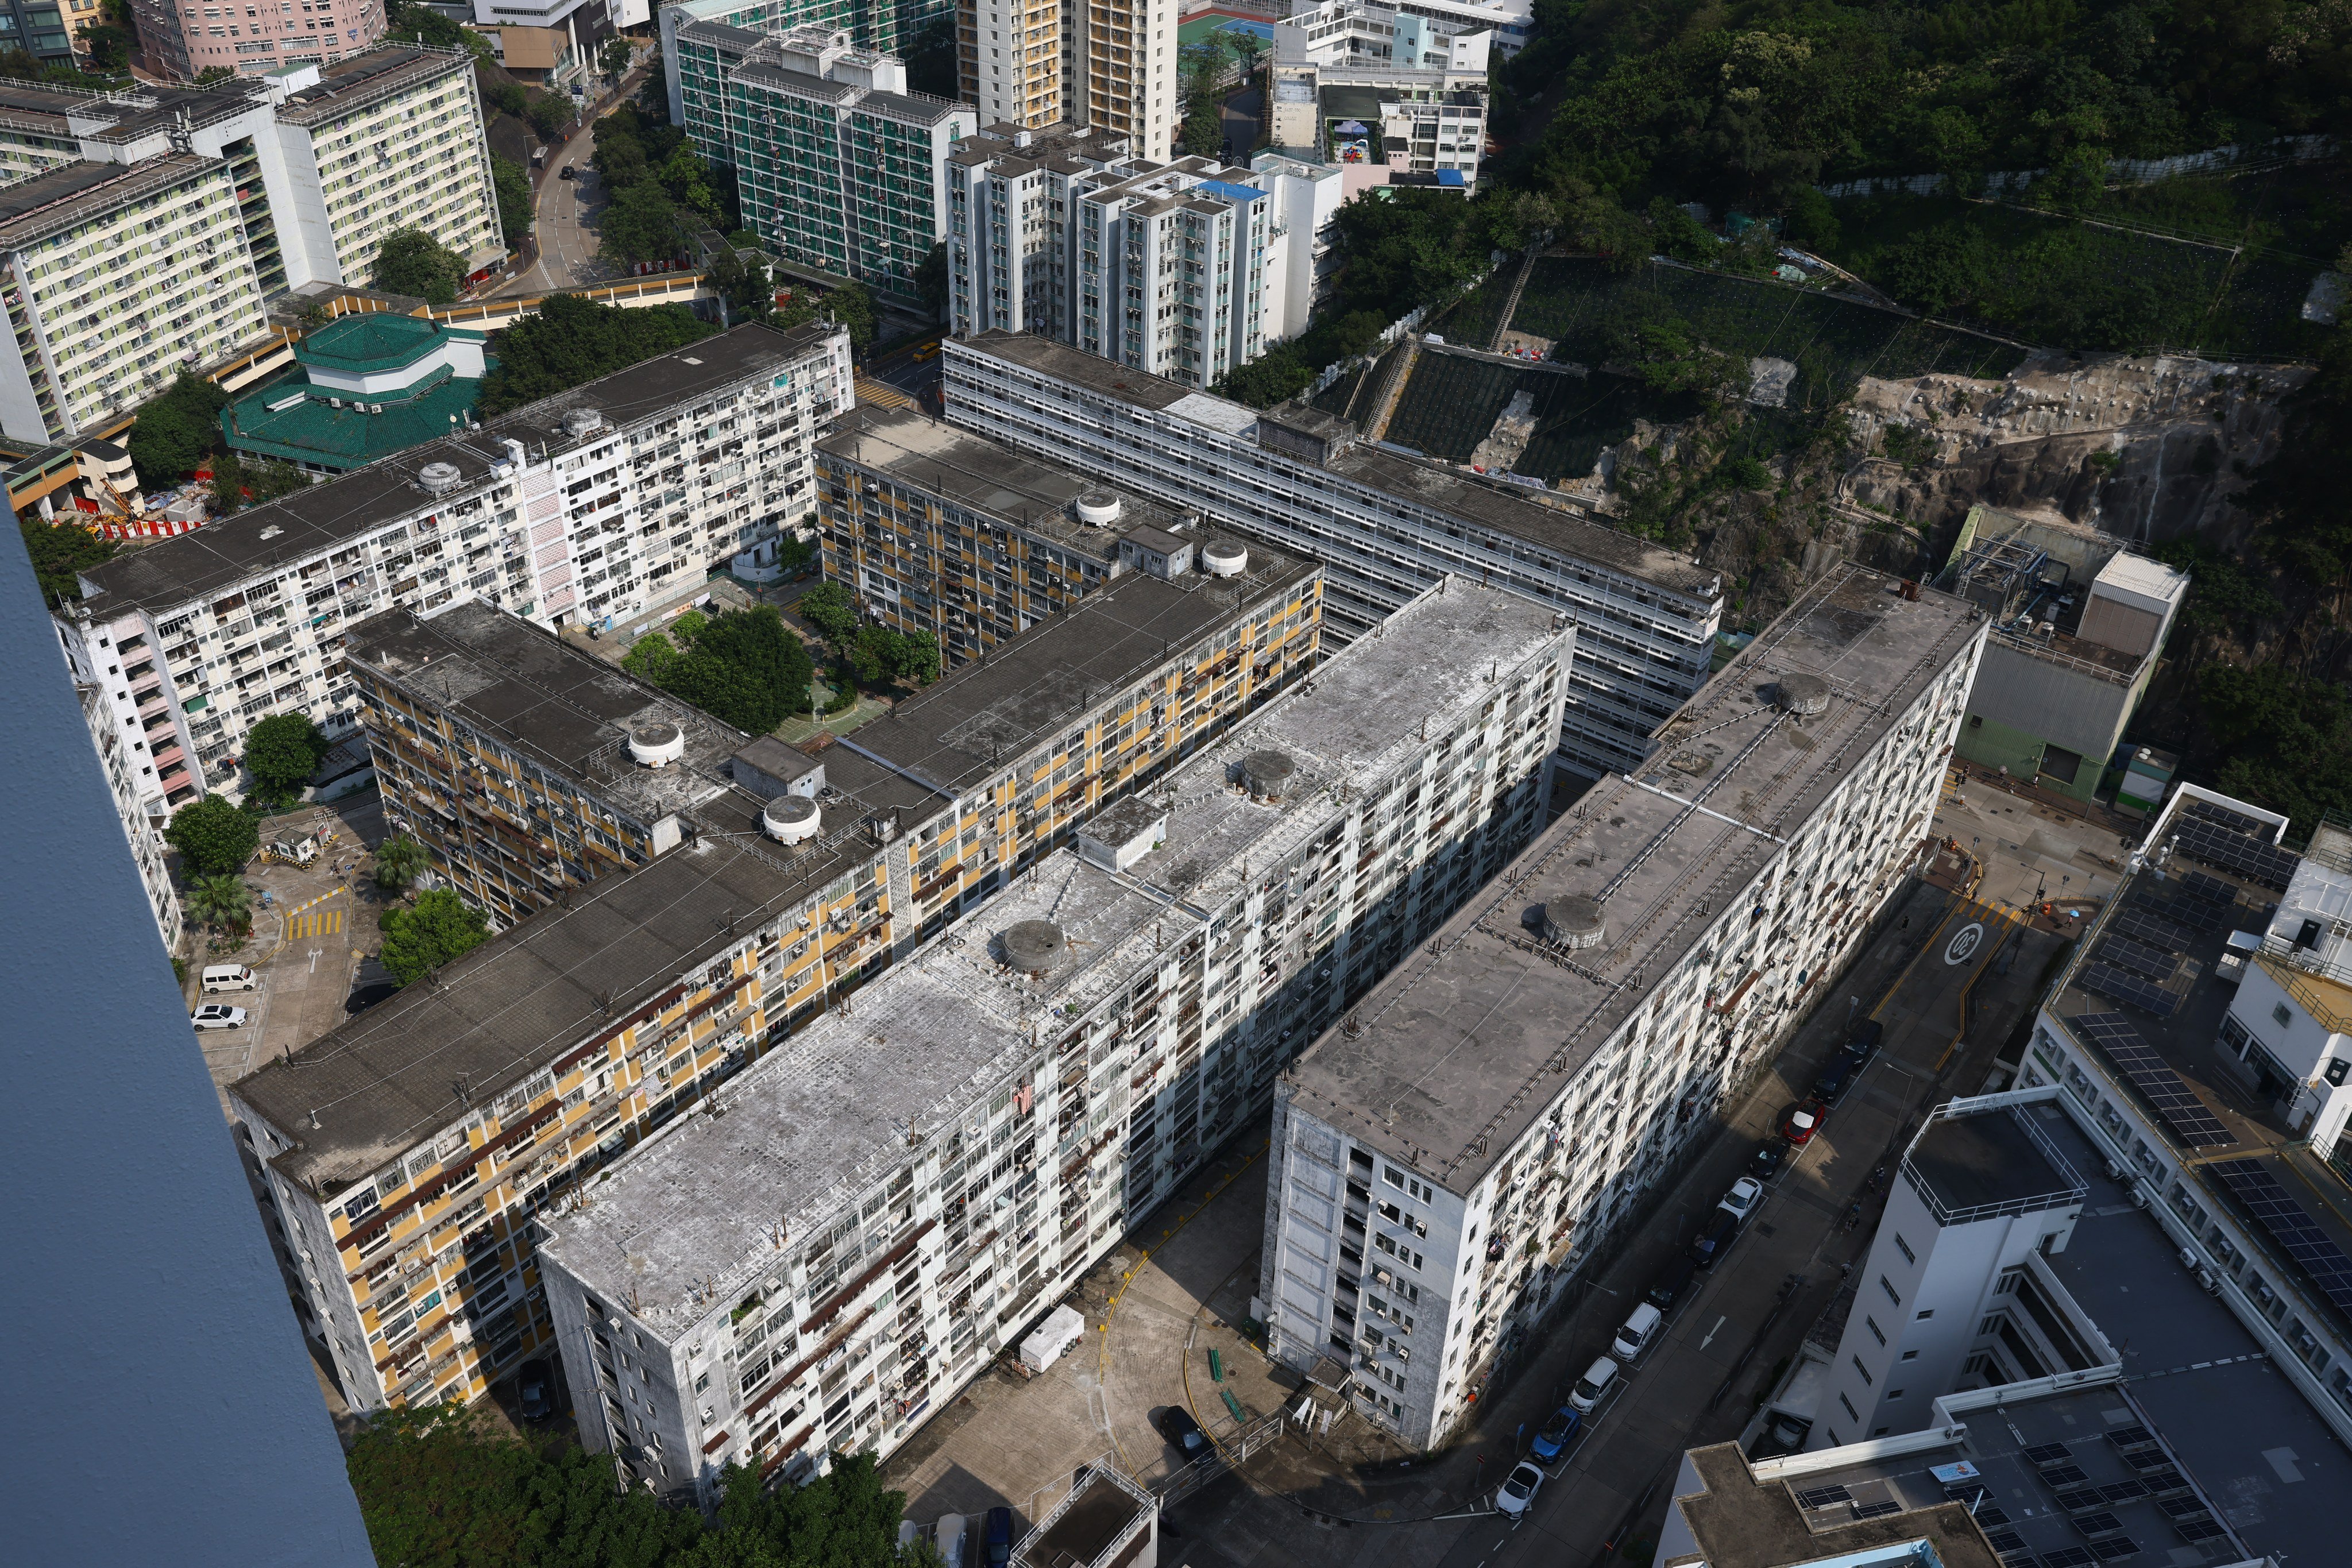 Construction at the site in Shek Kip Mei was previously estimated to be completed by 2027. Photo: Dickson Lee